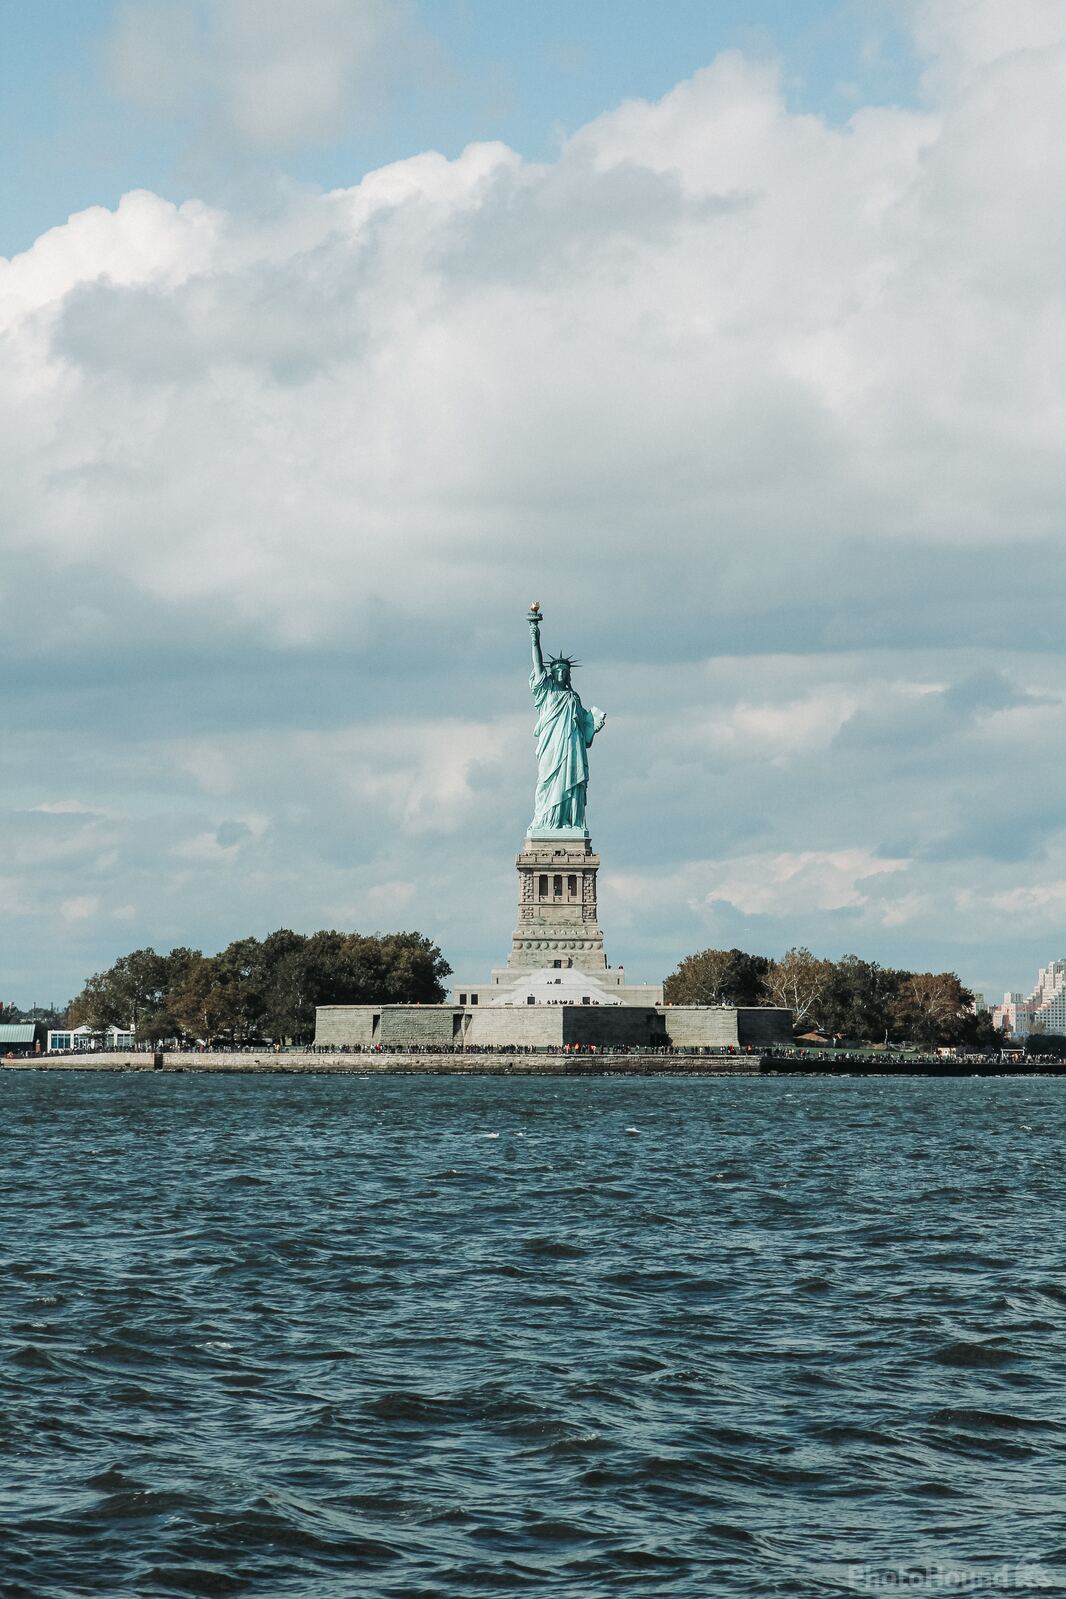 Image of Statue Of Liberty from Staten Island Ferry by Team PhotoHound